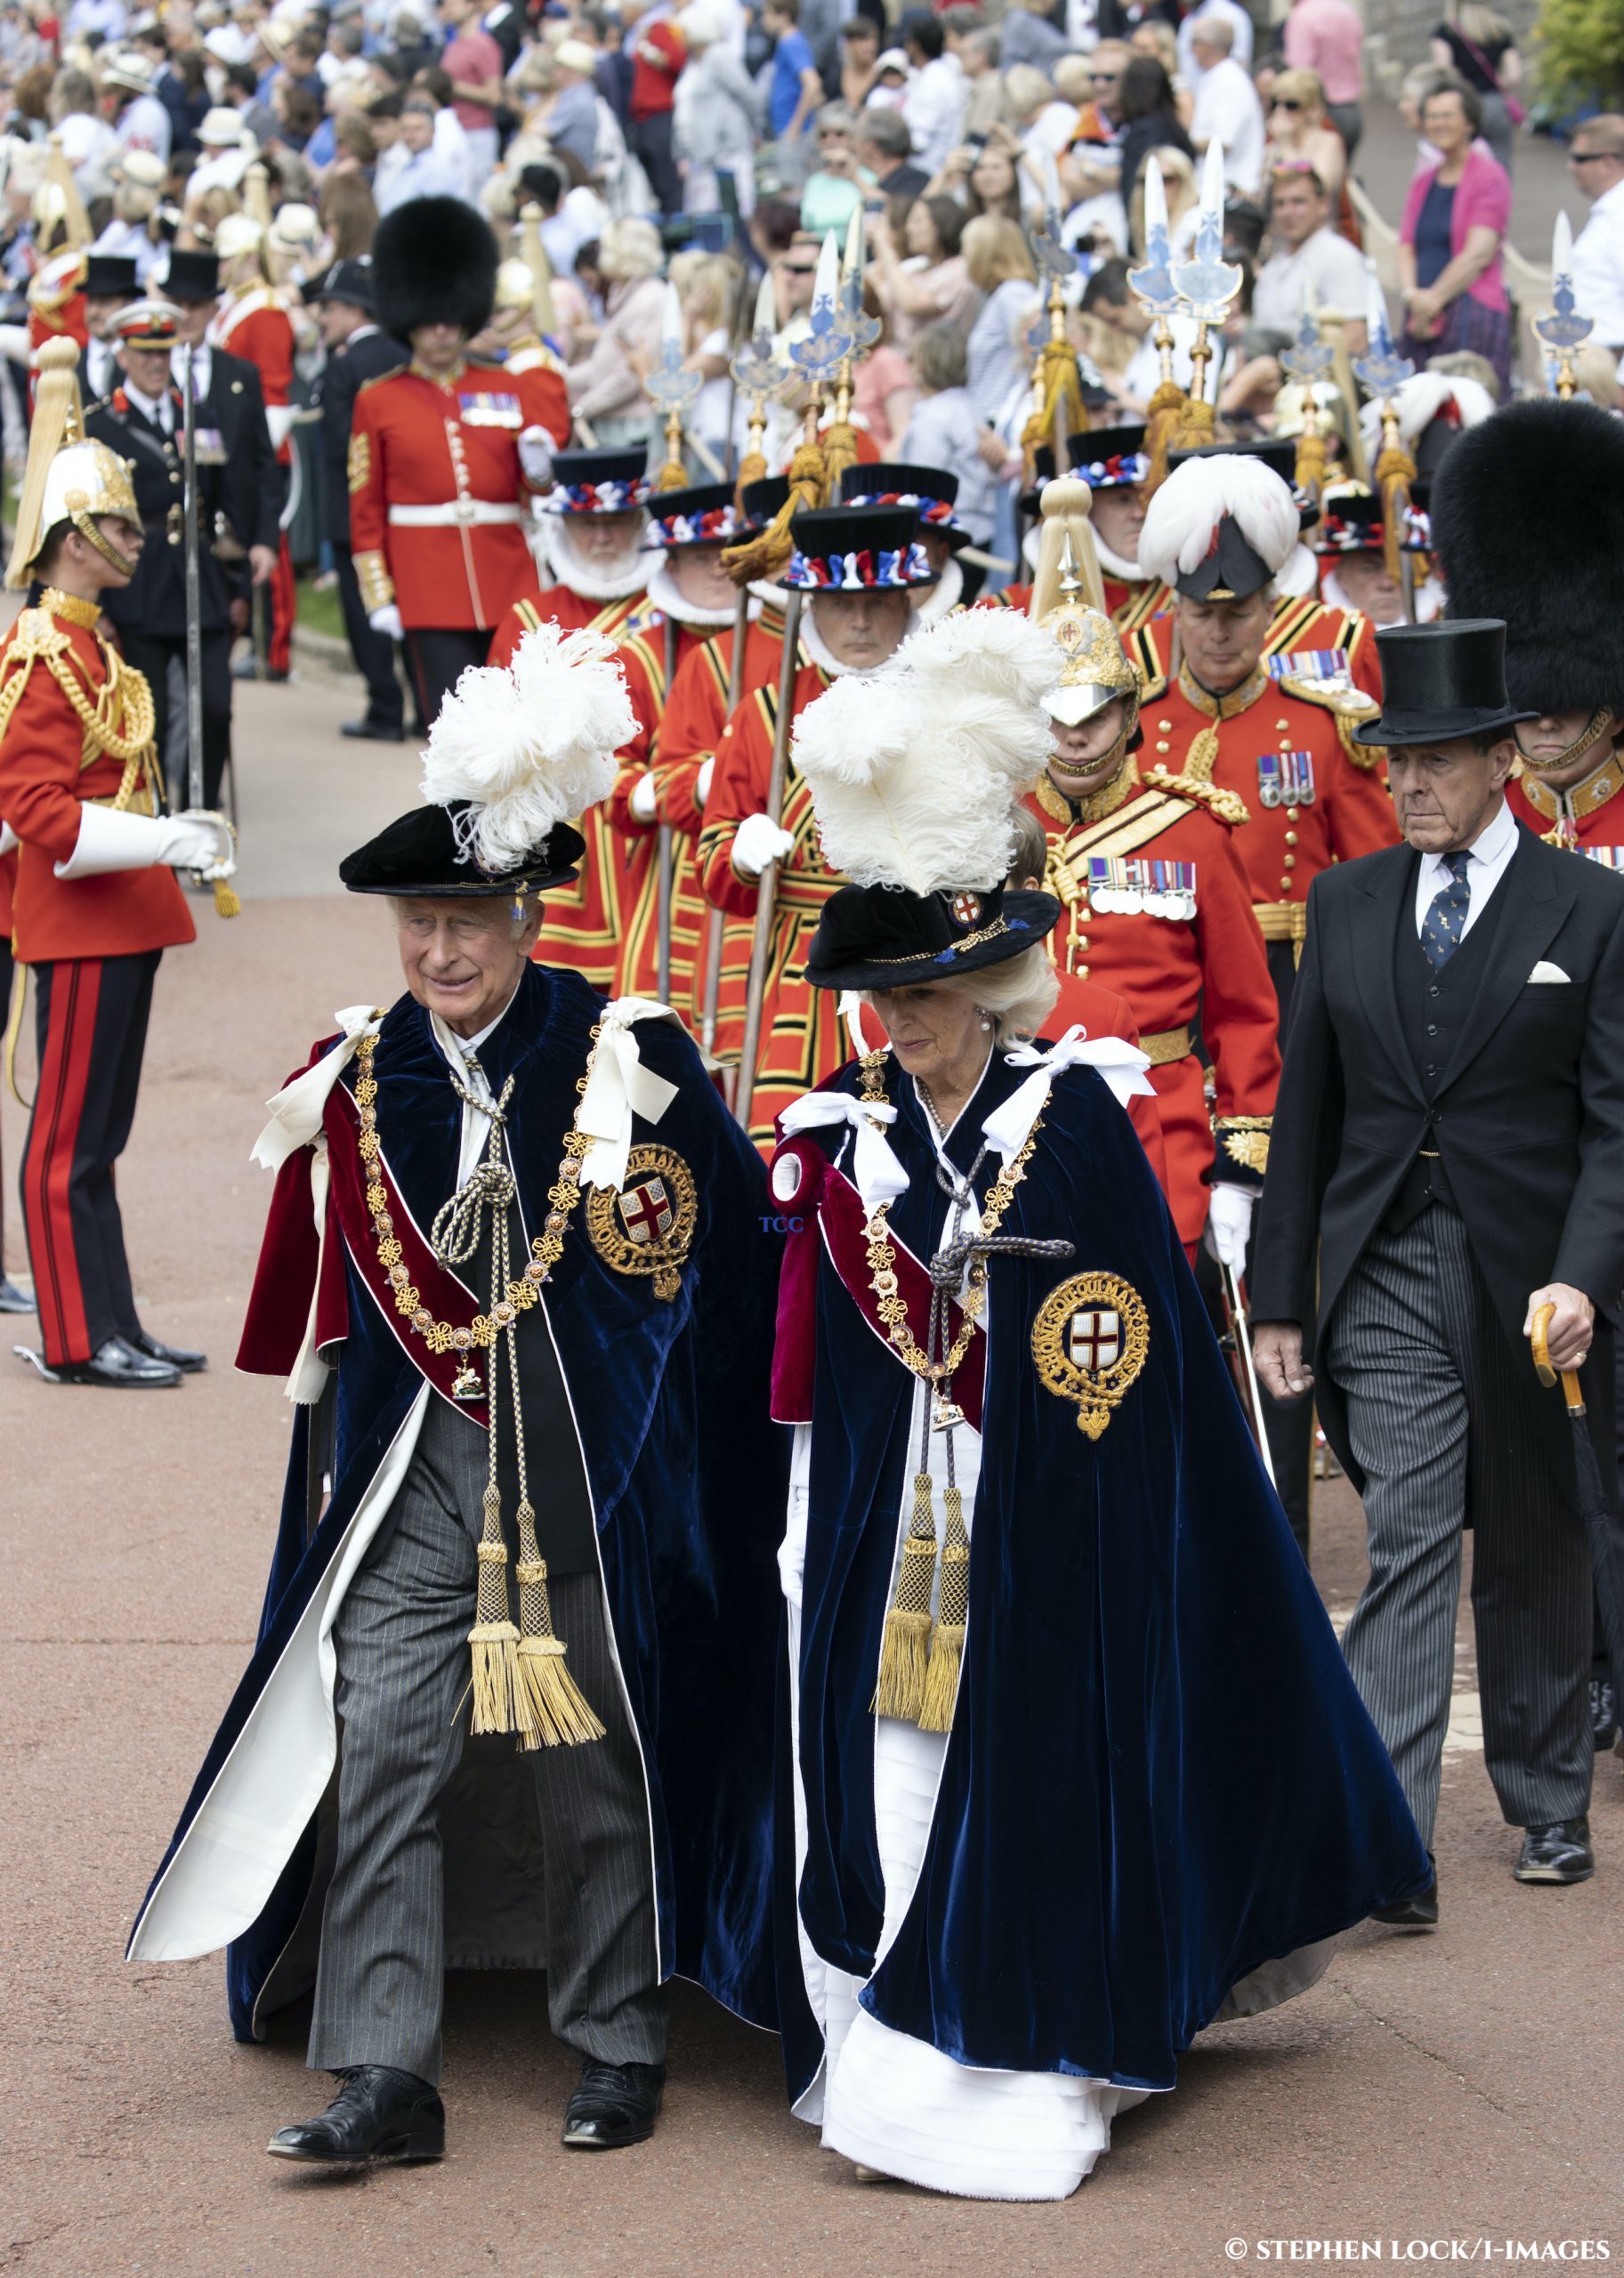 What Is Garter Day?